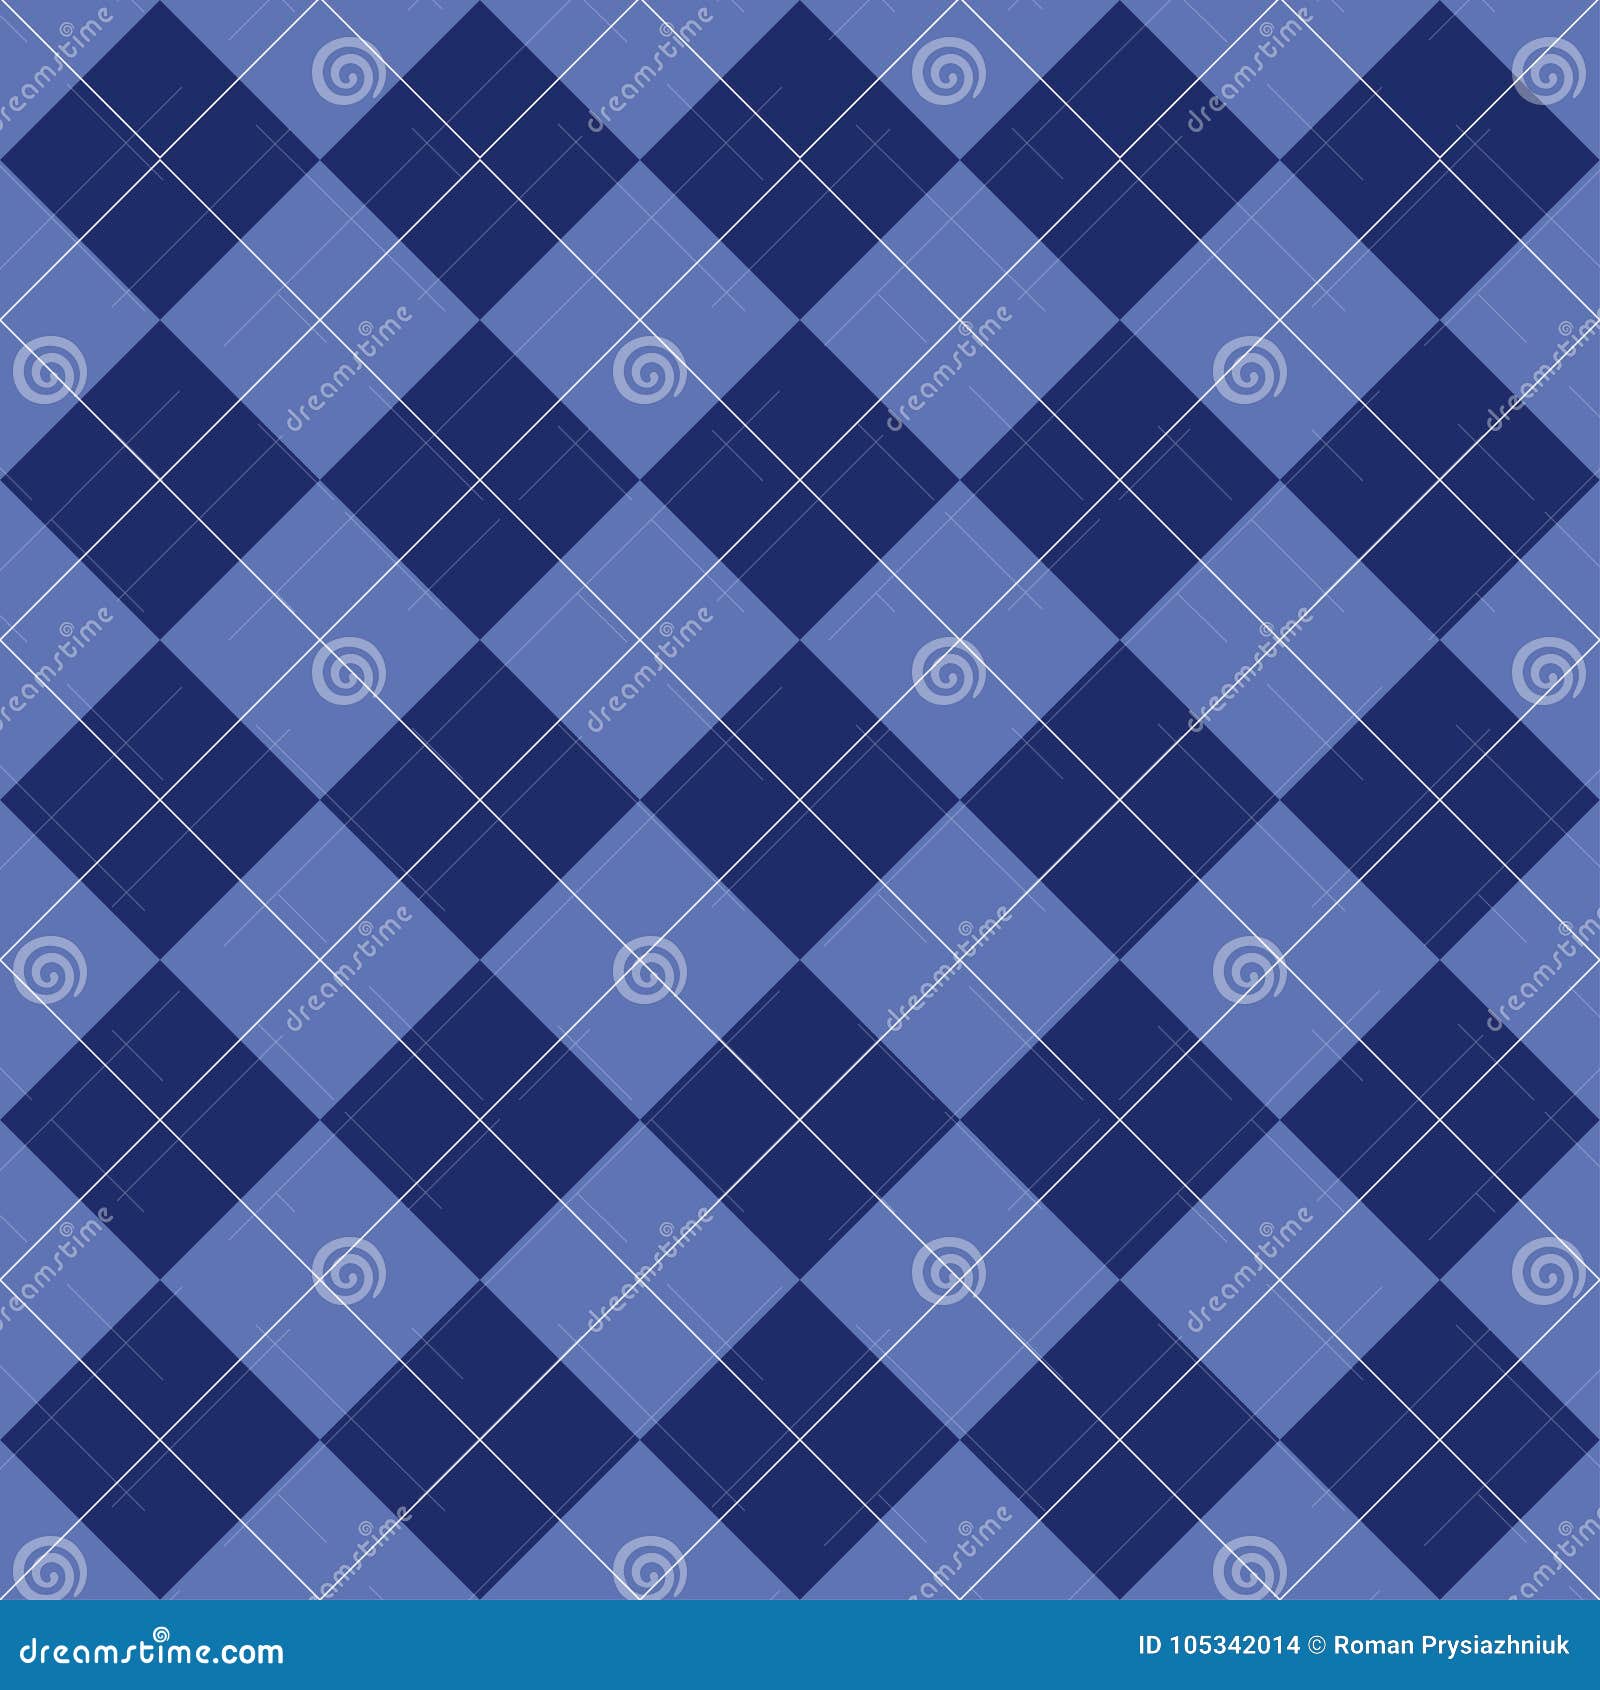 seamless argyle pattern. rhombus of blue color. texture for plaid, tablecloths, clothes, shirts and other textile products.